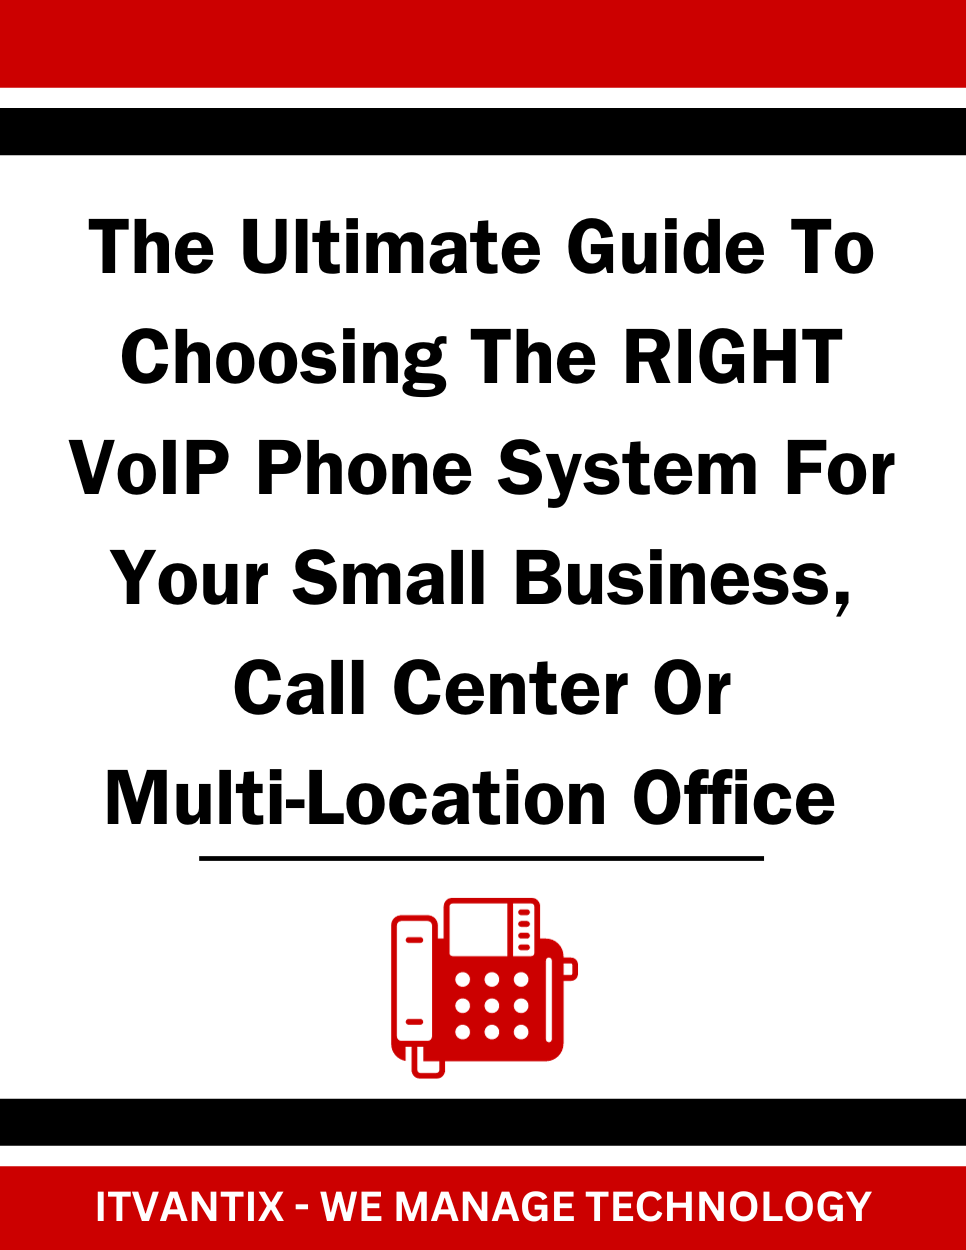 Get a FREE VoIP Carrier Assessment for your Business Phone System